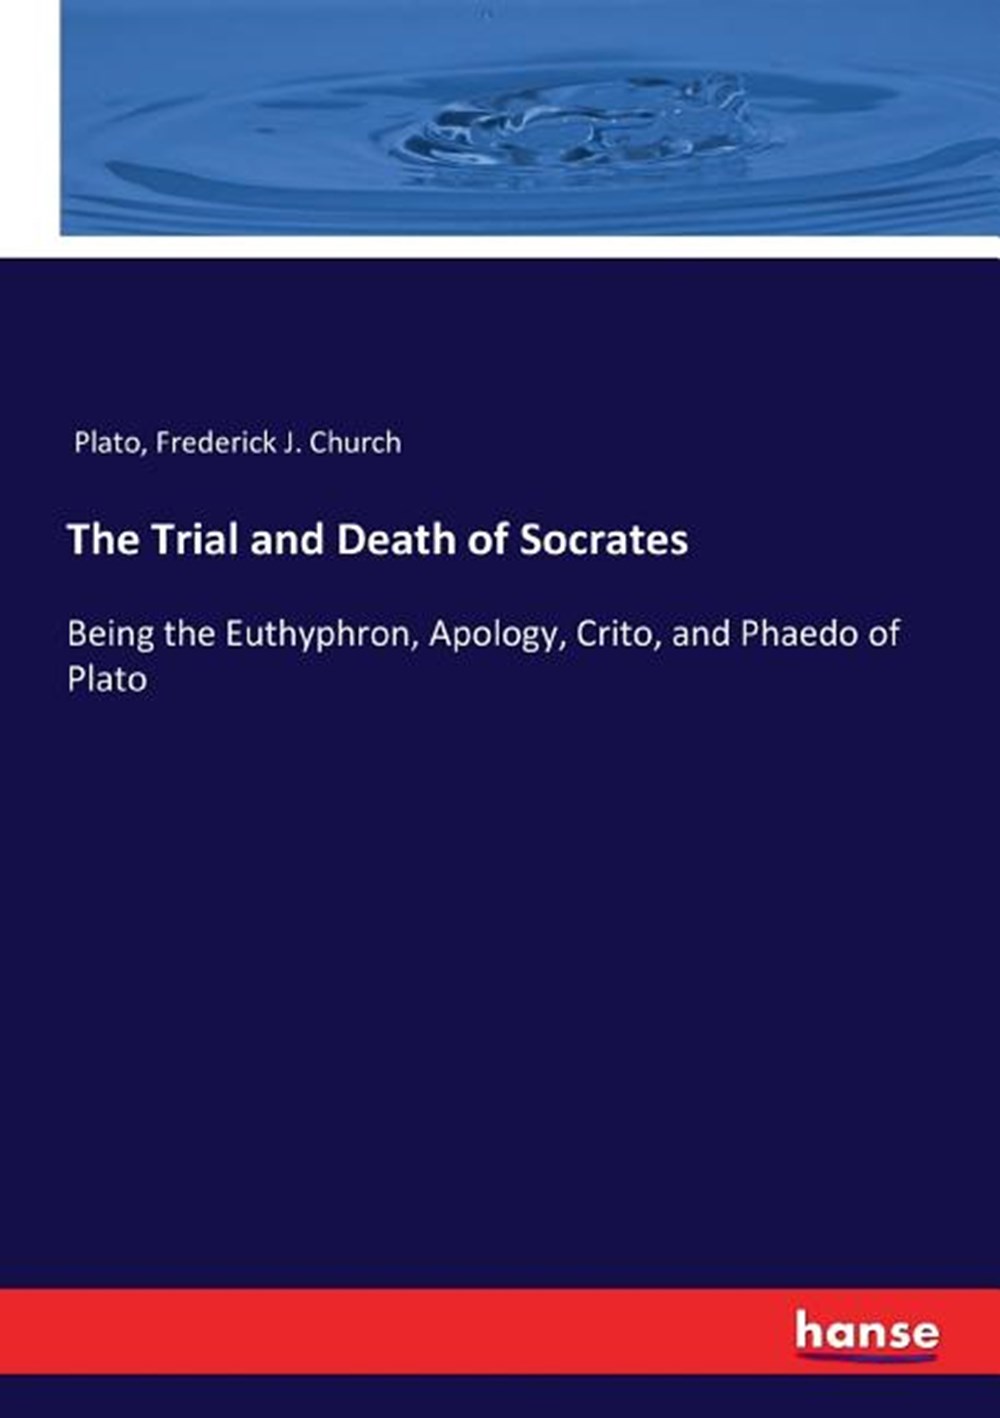 Trial and Death of Socrates: Being the Euthyphron, Apology, Crito, and Phaedo of Plato